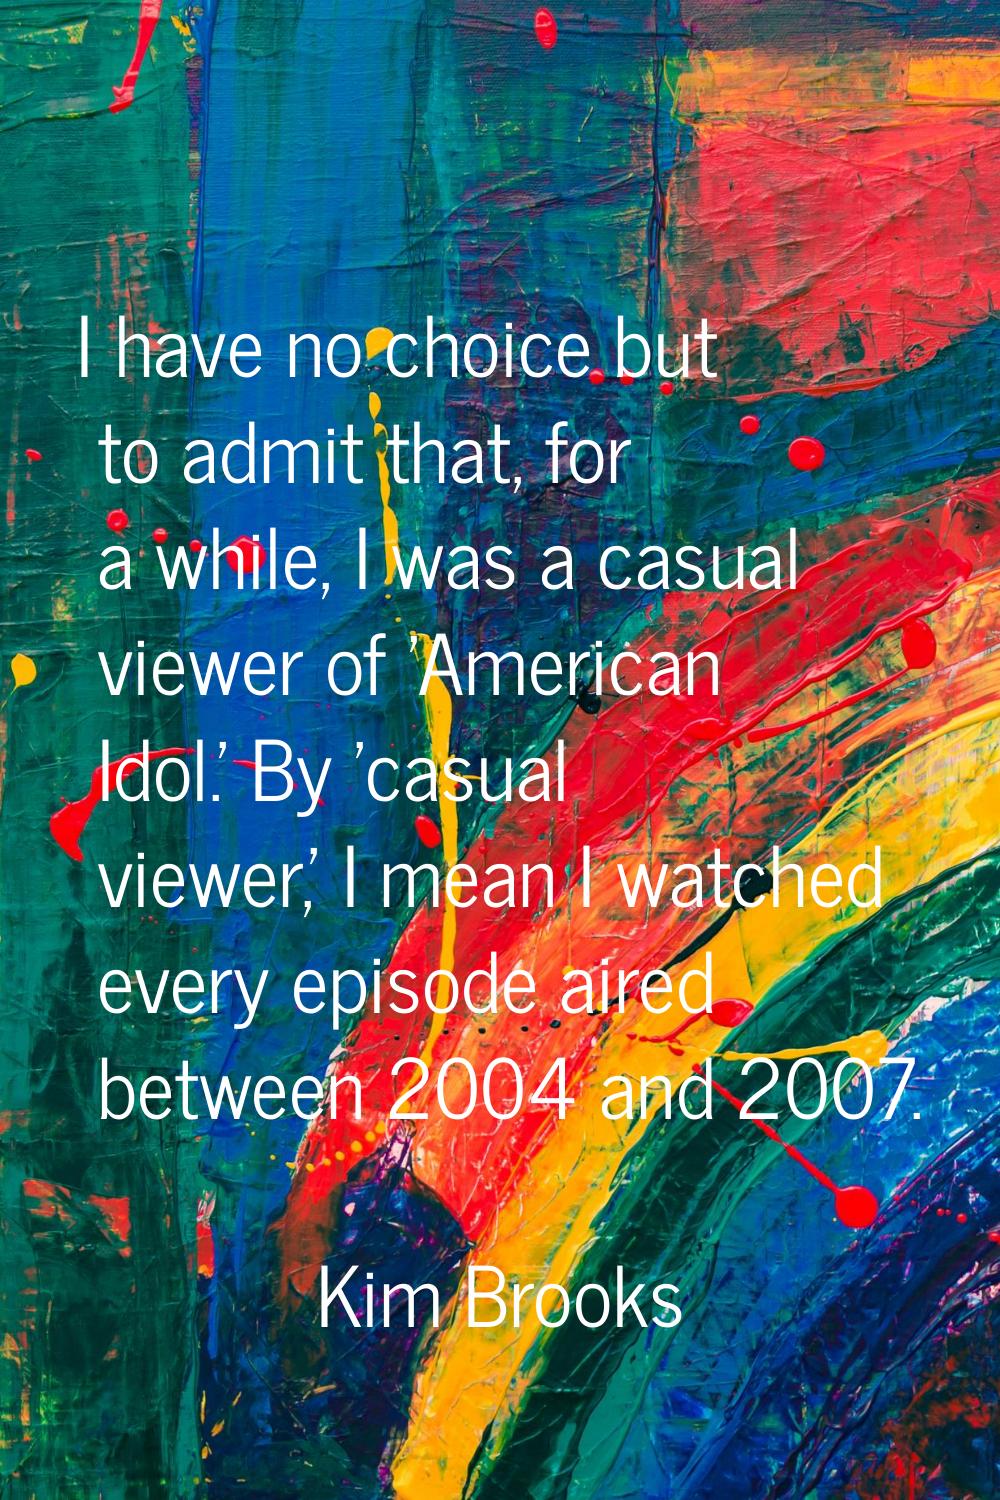 I have no choice but to admit that, for a while, I was a casual viewer of 'American Idol.' By 'casu